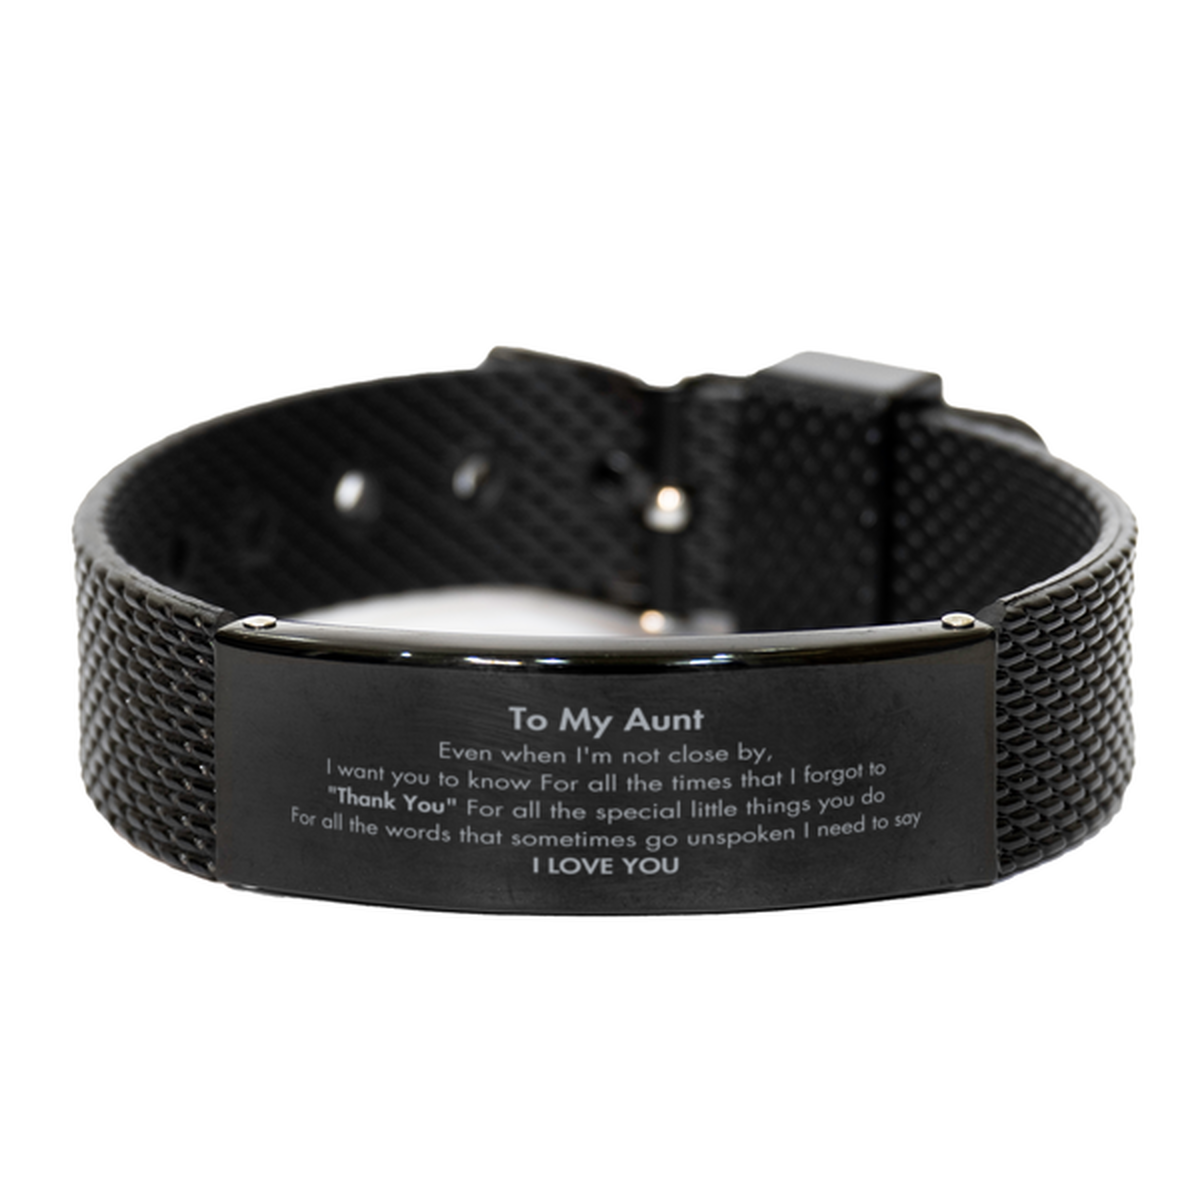 Thank You Gifts for Aunt, Keepsake Black Shark Mesh Bracelet Gifts for Aunt Birthday Mother's day Father's Day Aunt For all the words That sometimes go unspoken I need to say I LOVE YOU